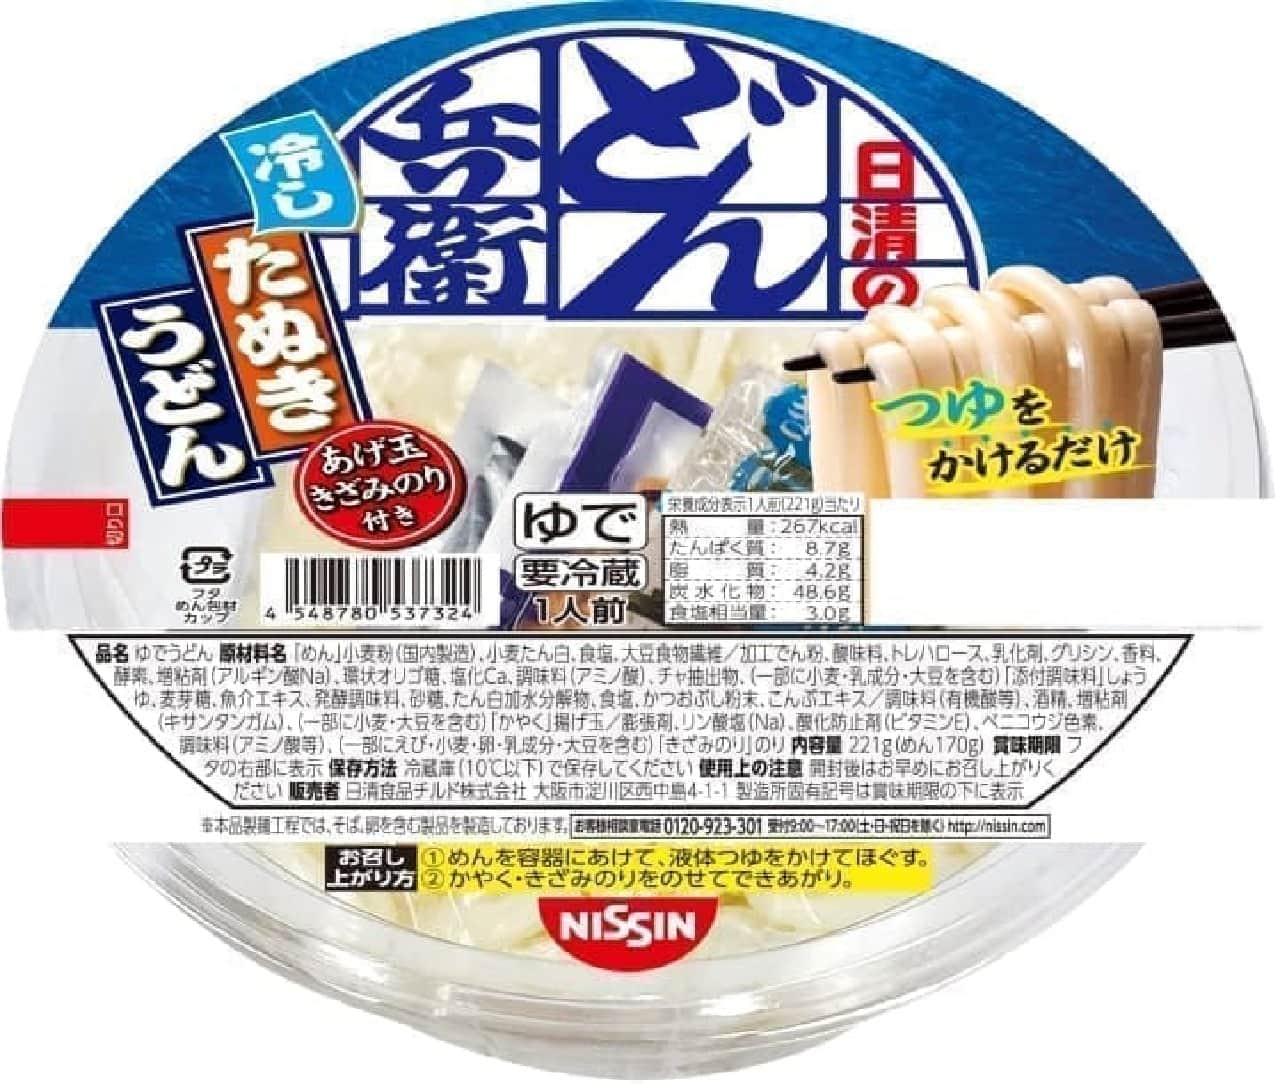 Nissin Foods "Chilled Cup Nissin Donbei Cold Tanuki Udon"